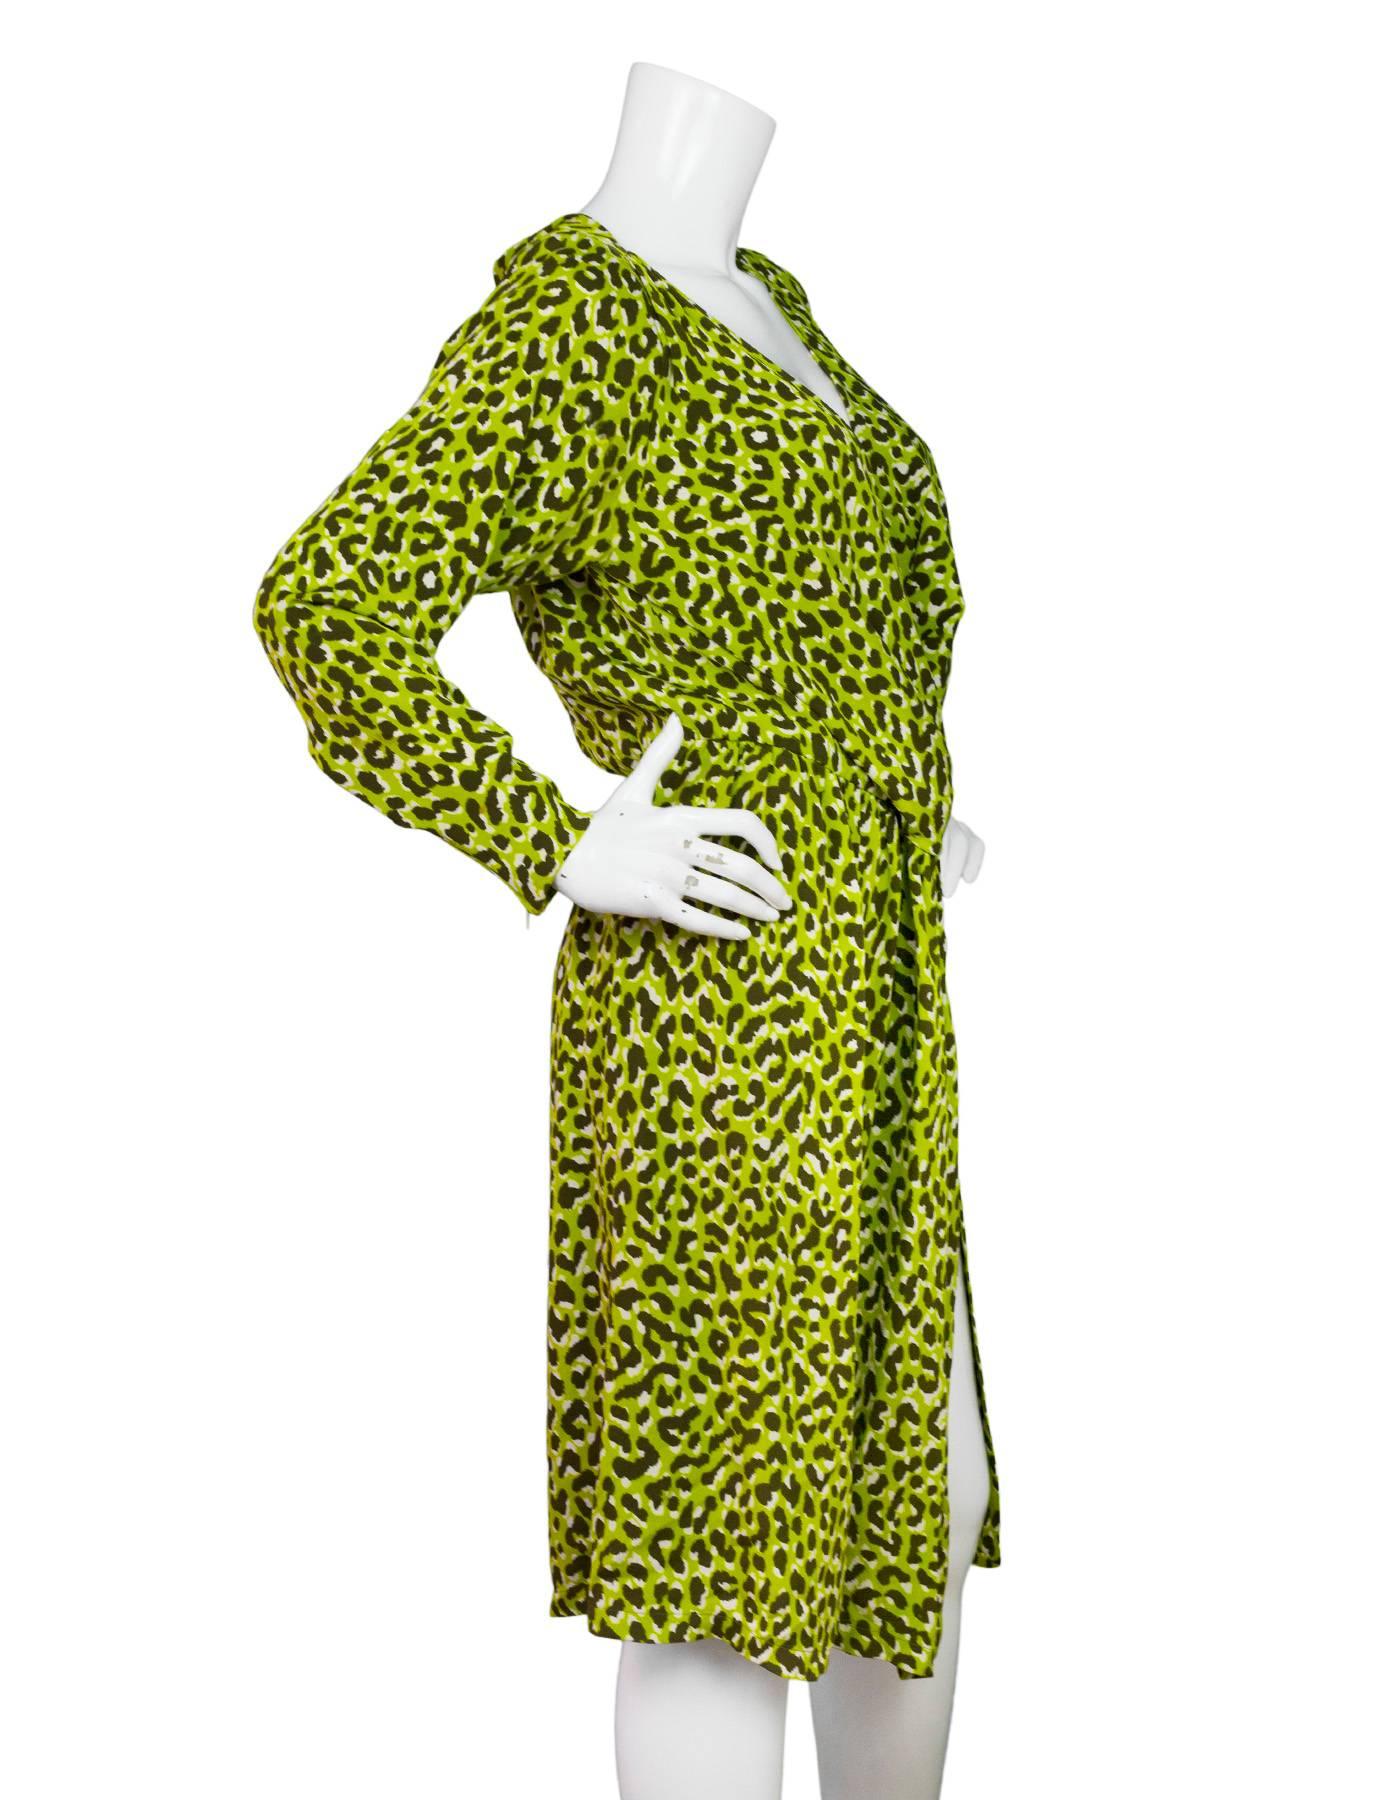 YSL Green & Brown Leopard Print Wrap Dress 

Made In: France
Color: Brown and green
Composition: 100% silk
Lining: None
Closure/Opening: Hidden waist snaps
Exterior Pockets: None
Interior Pockets: None
Overall Condition: Excellent pre-owned